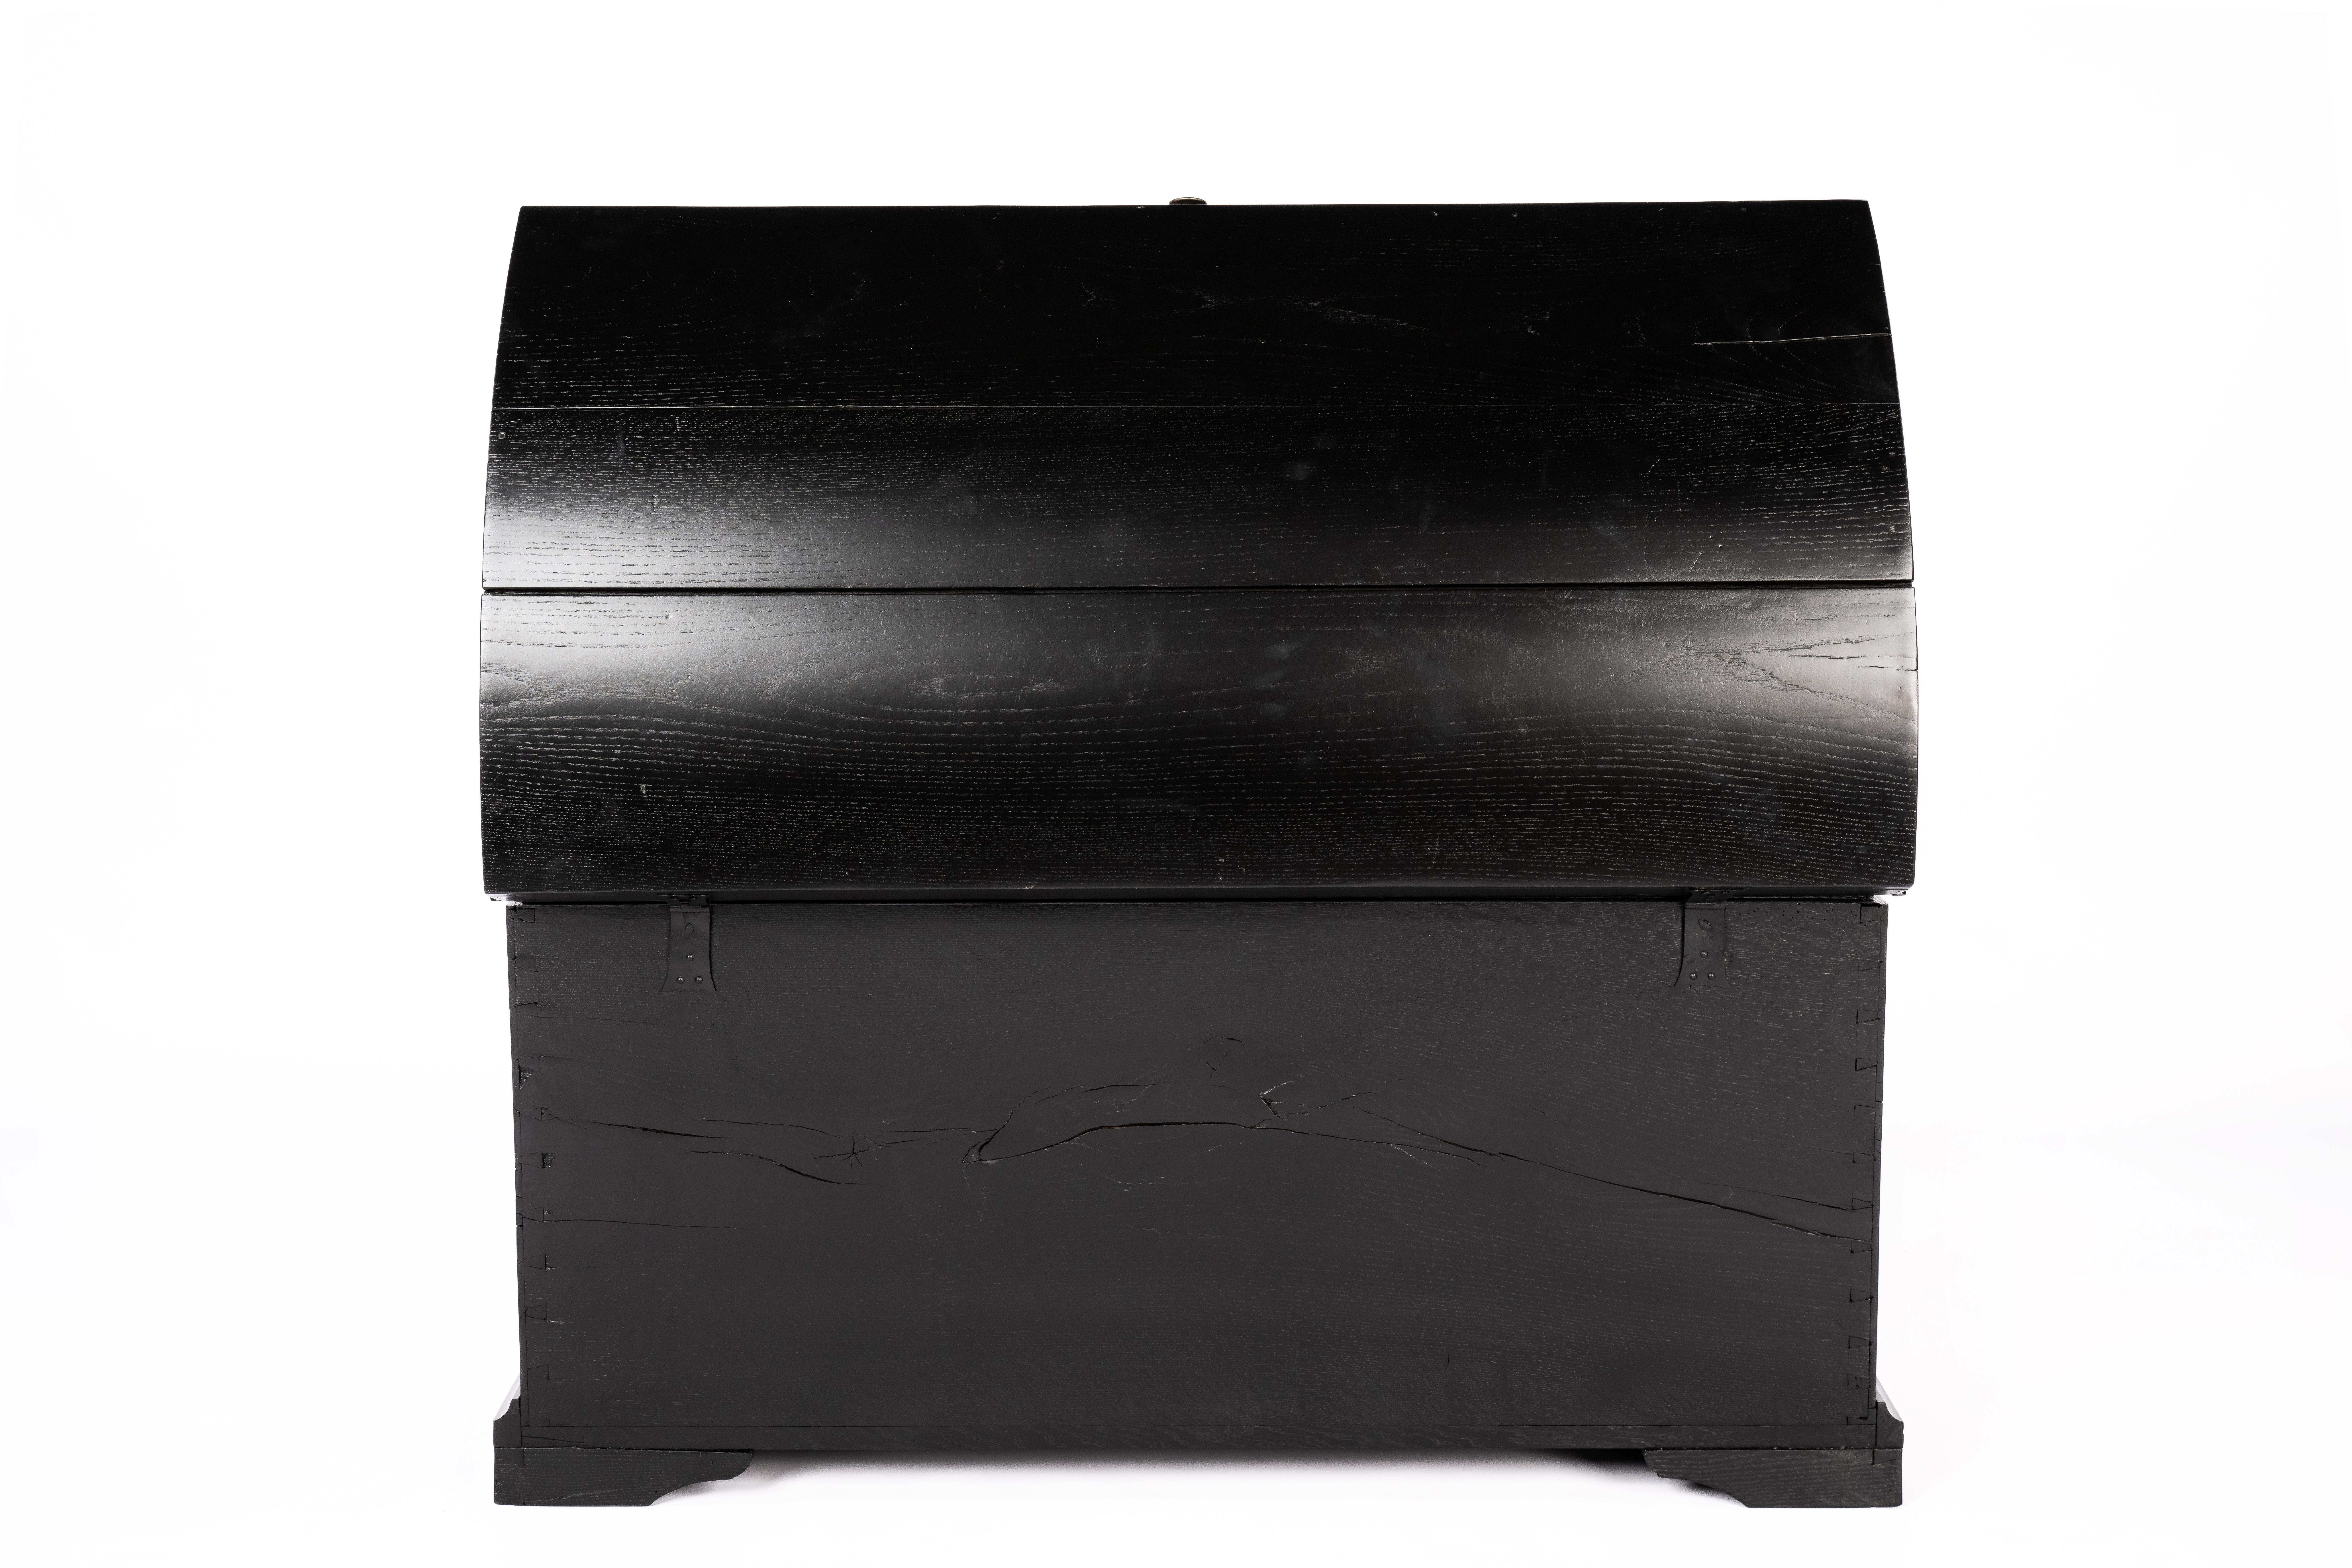 Steel Antique mid-19th century German Black oak dome top chest or blanket box